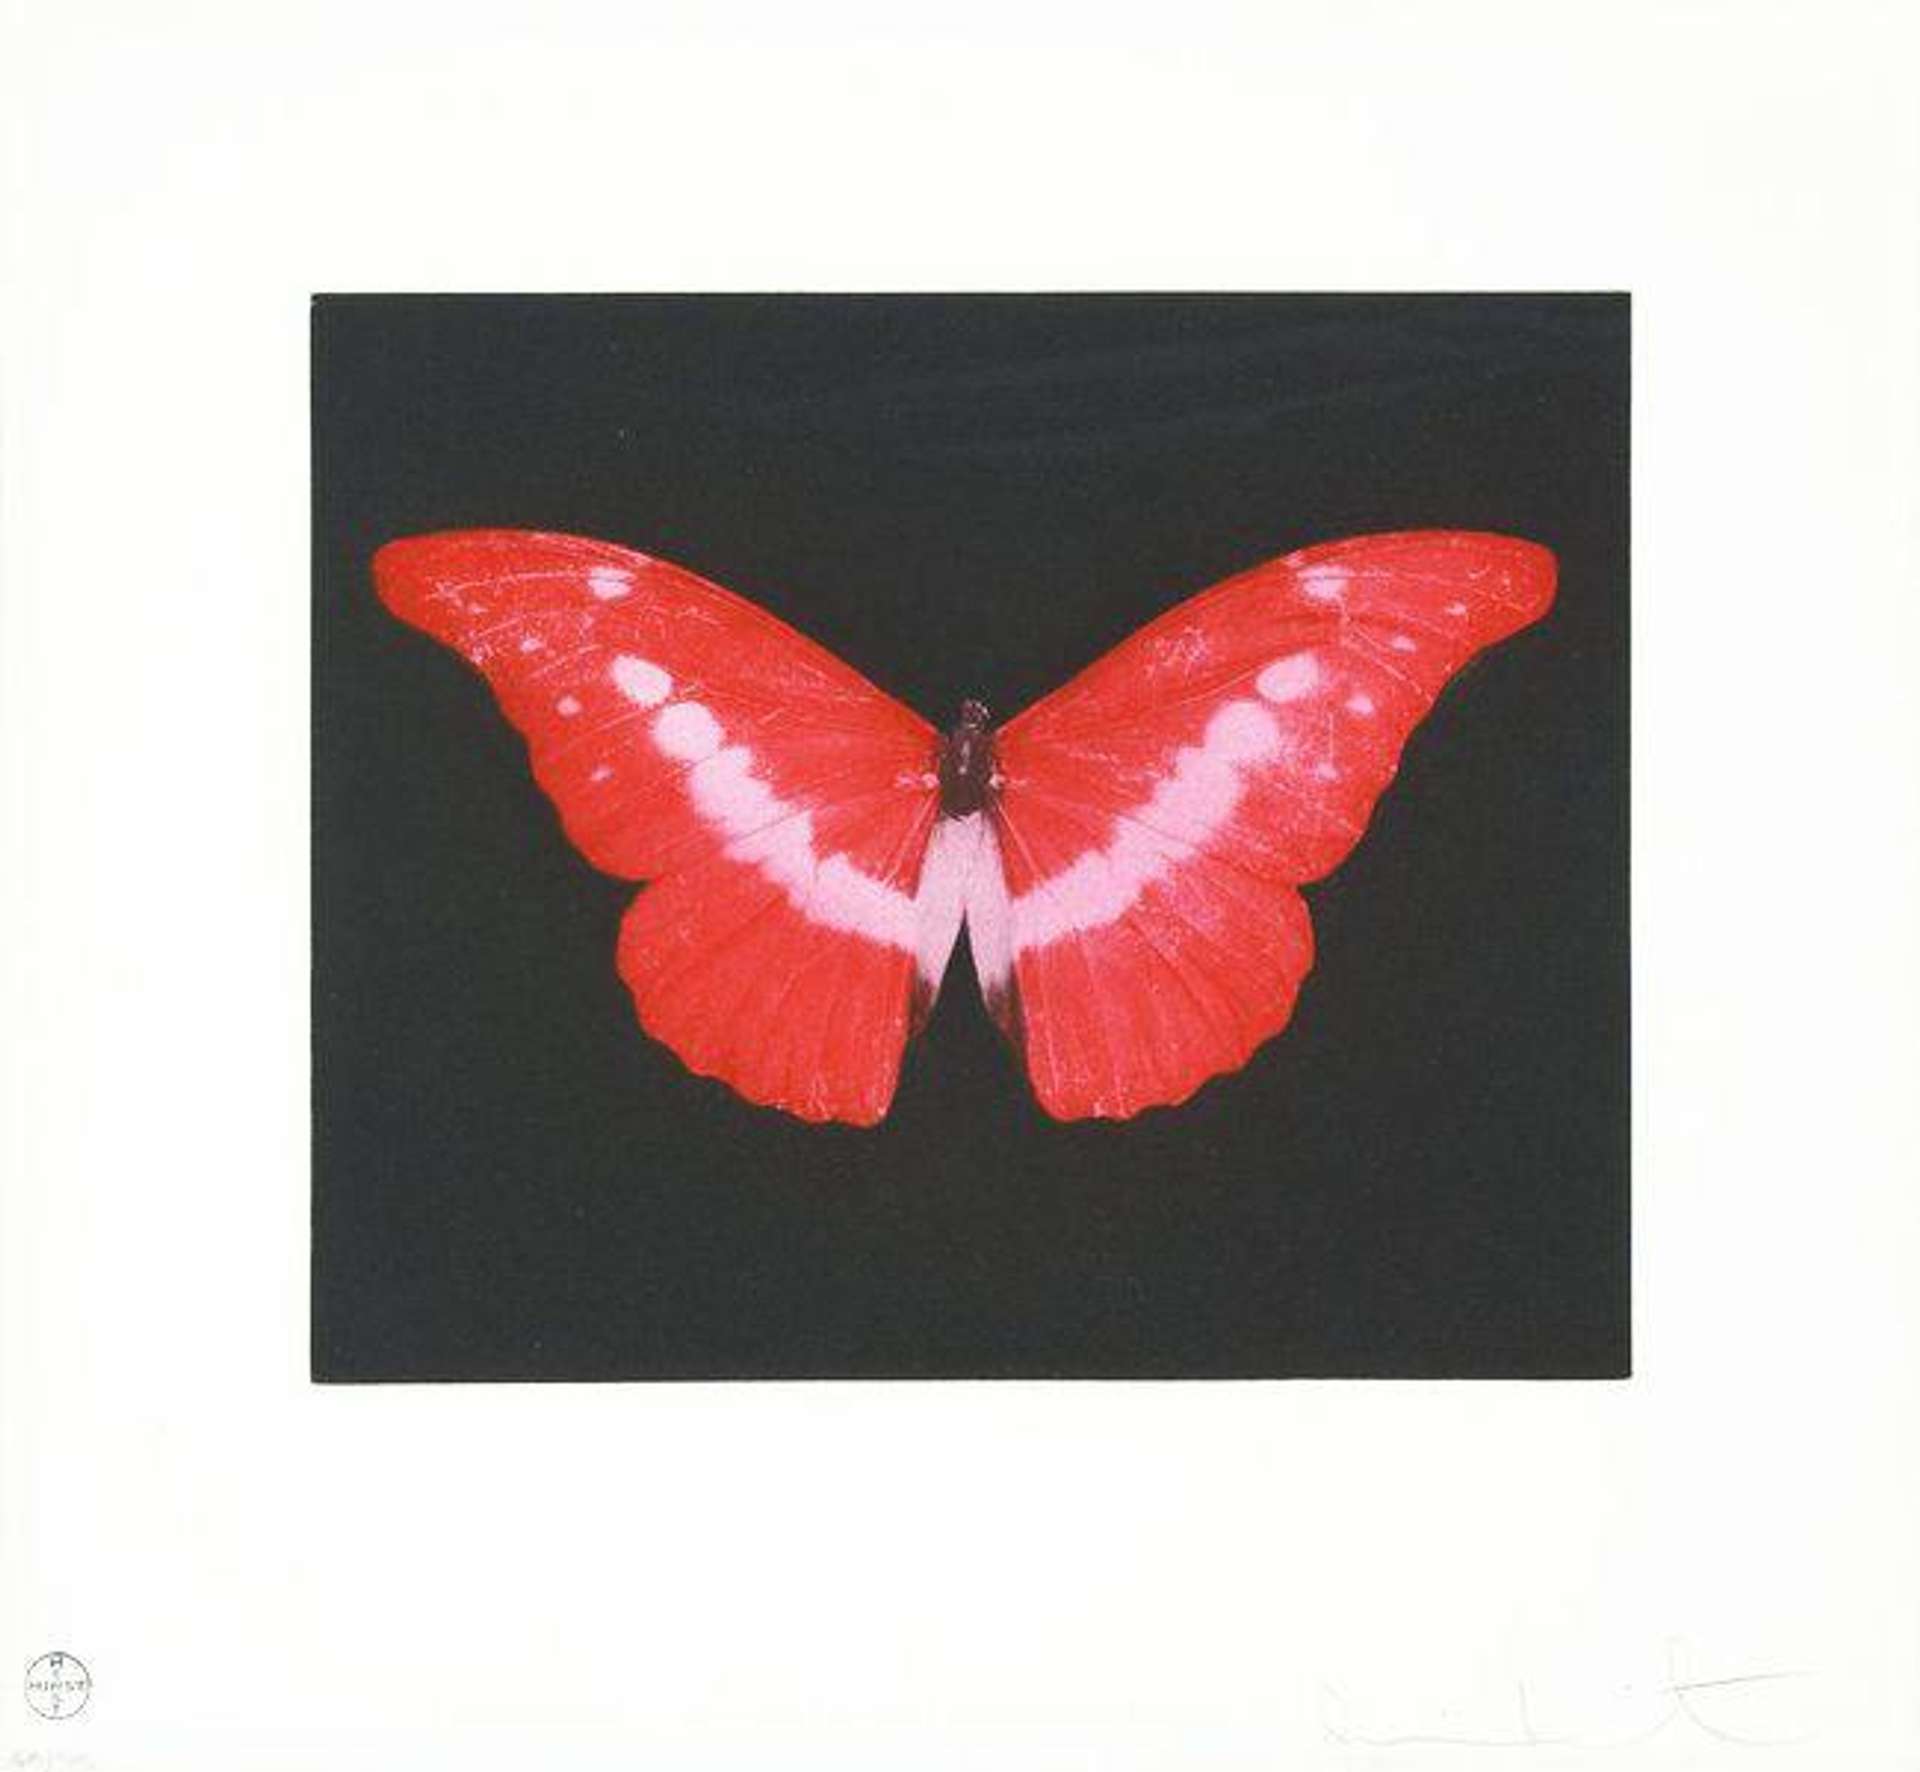 Damien Hirst: To Lose - Signed Print